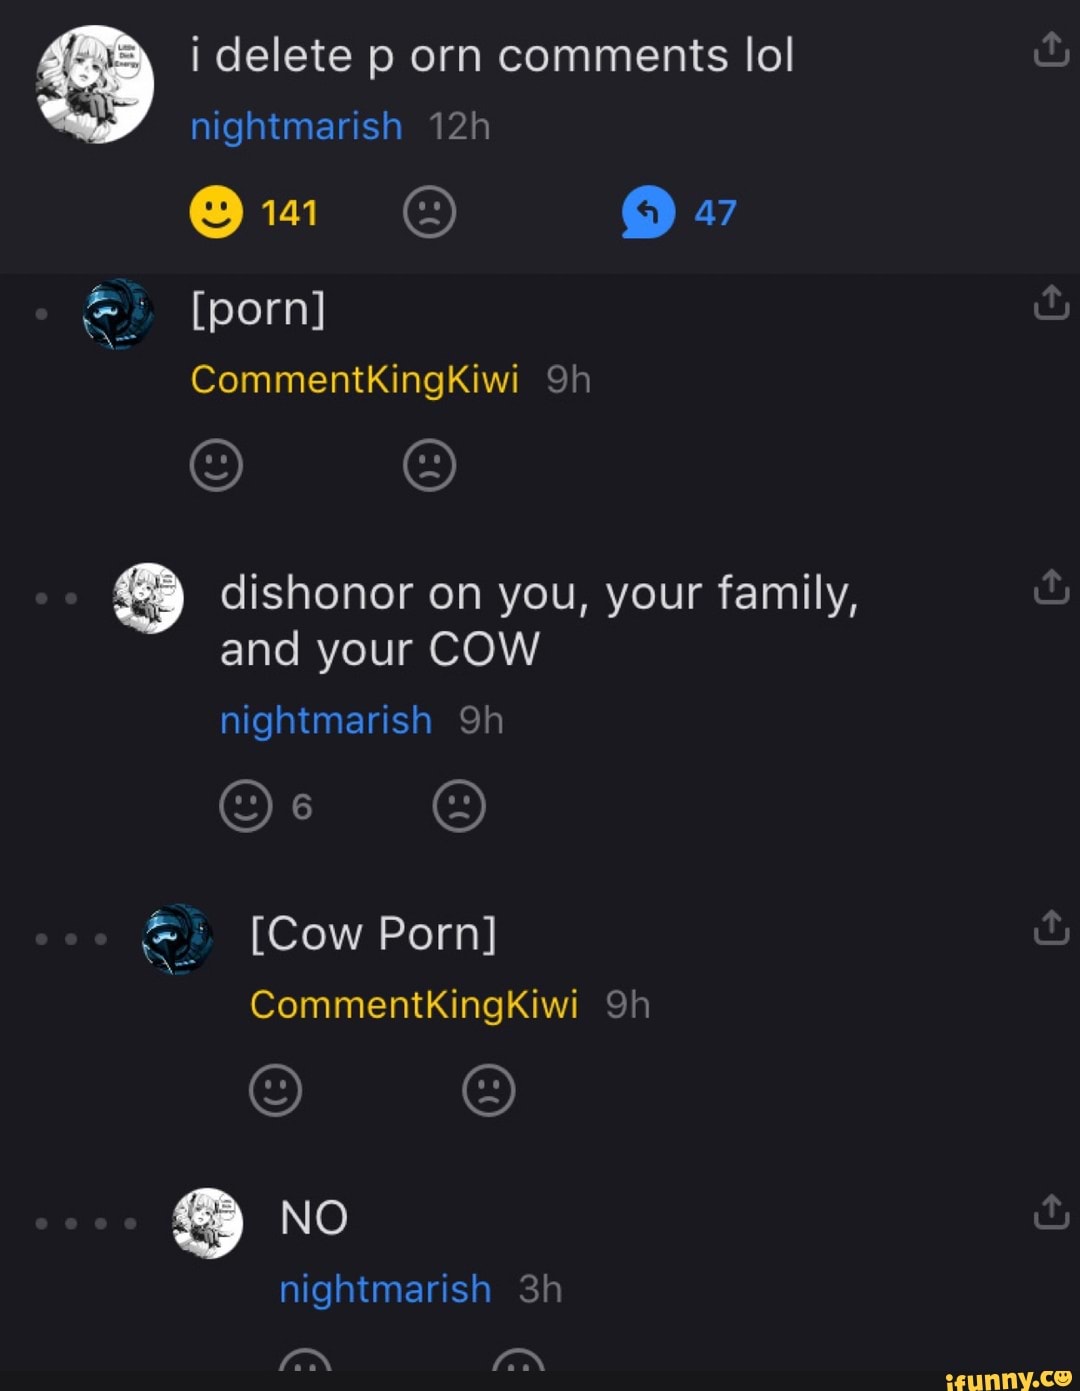 & i delete p nightmarish orn comments lol nightmarish eu 47 [porn]  CommentKingKiwi dishonor on you, your family, and your COW nightmarish Oh  Os [Cow Porn] CommentKingKiwi @ NO nightmarish - iFunny :)